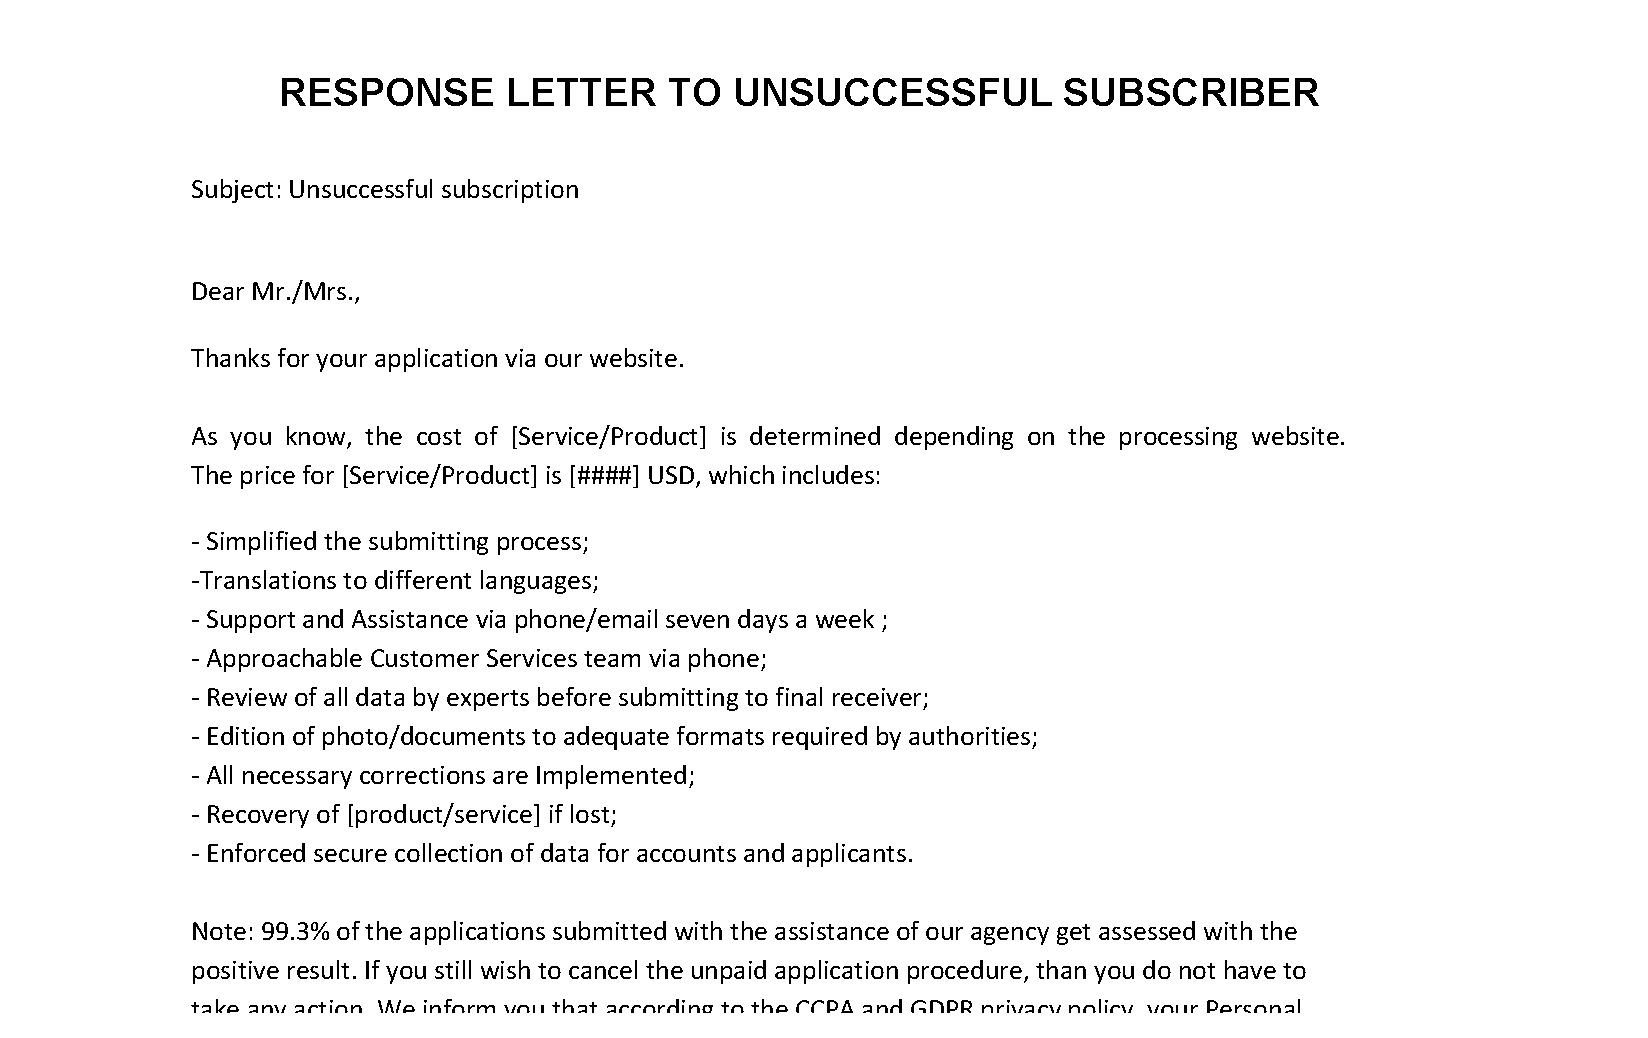 ccpa response letter to unsuccessful subscriber template